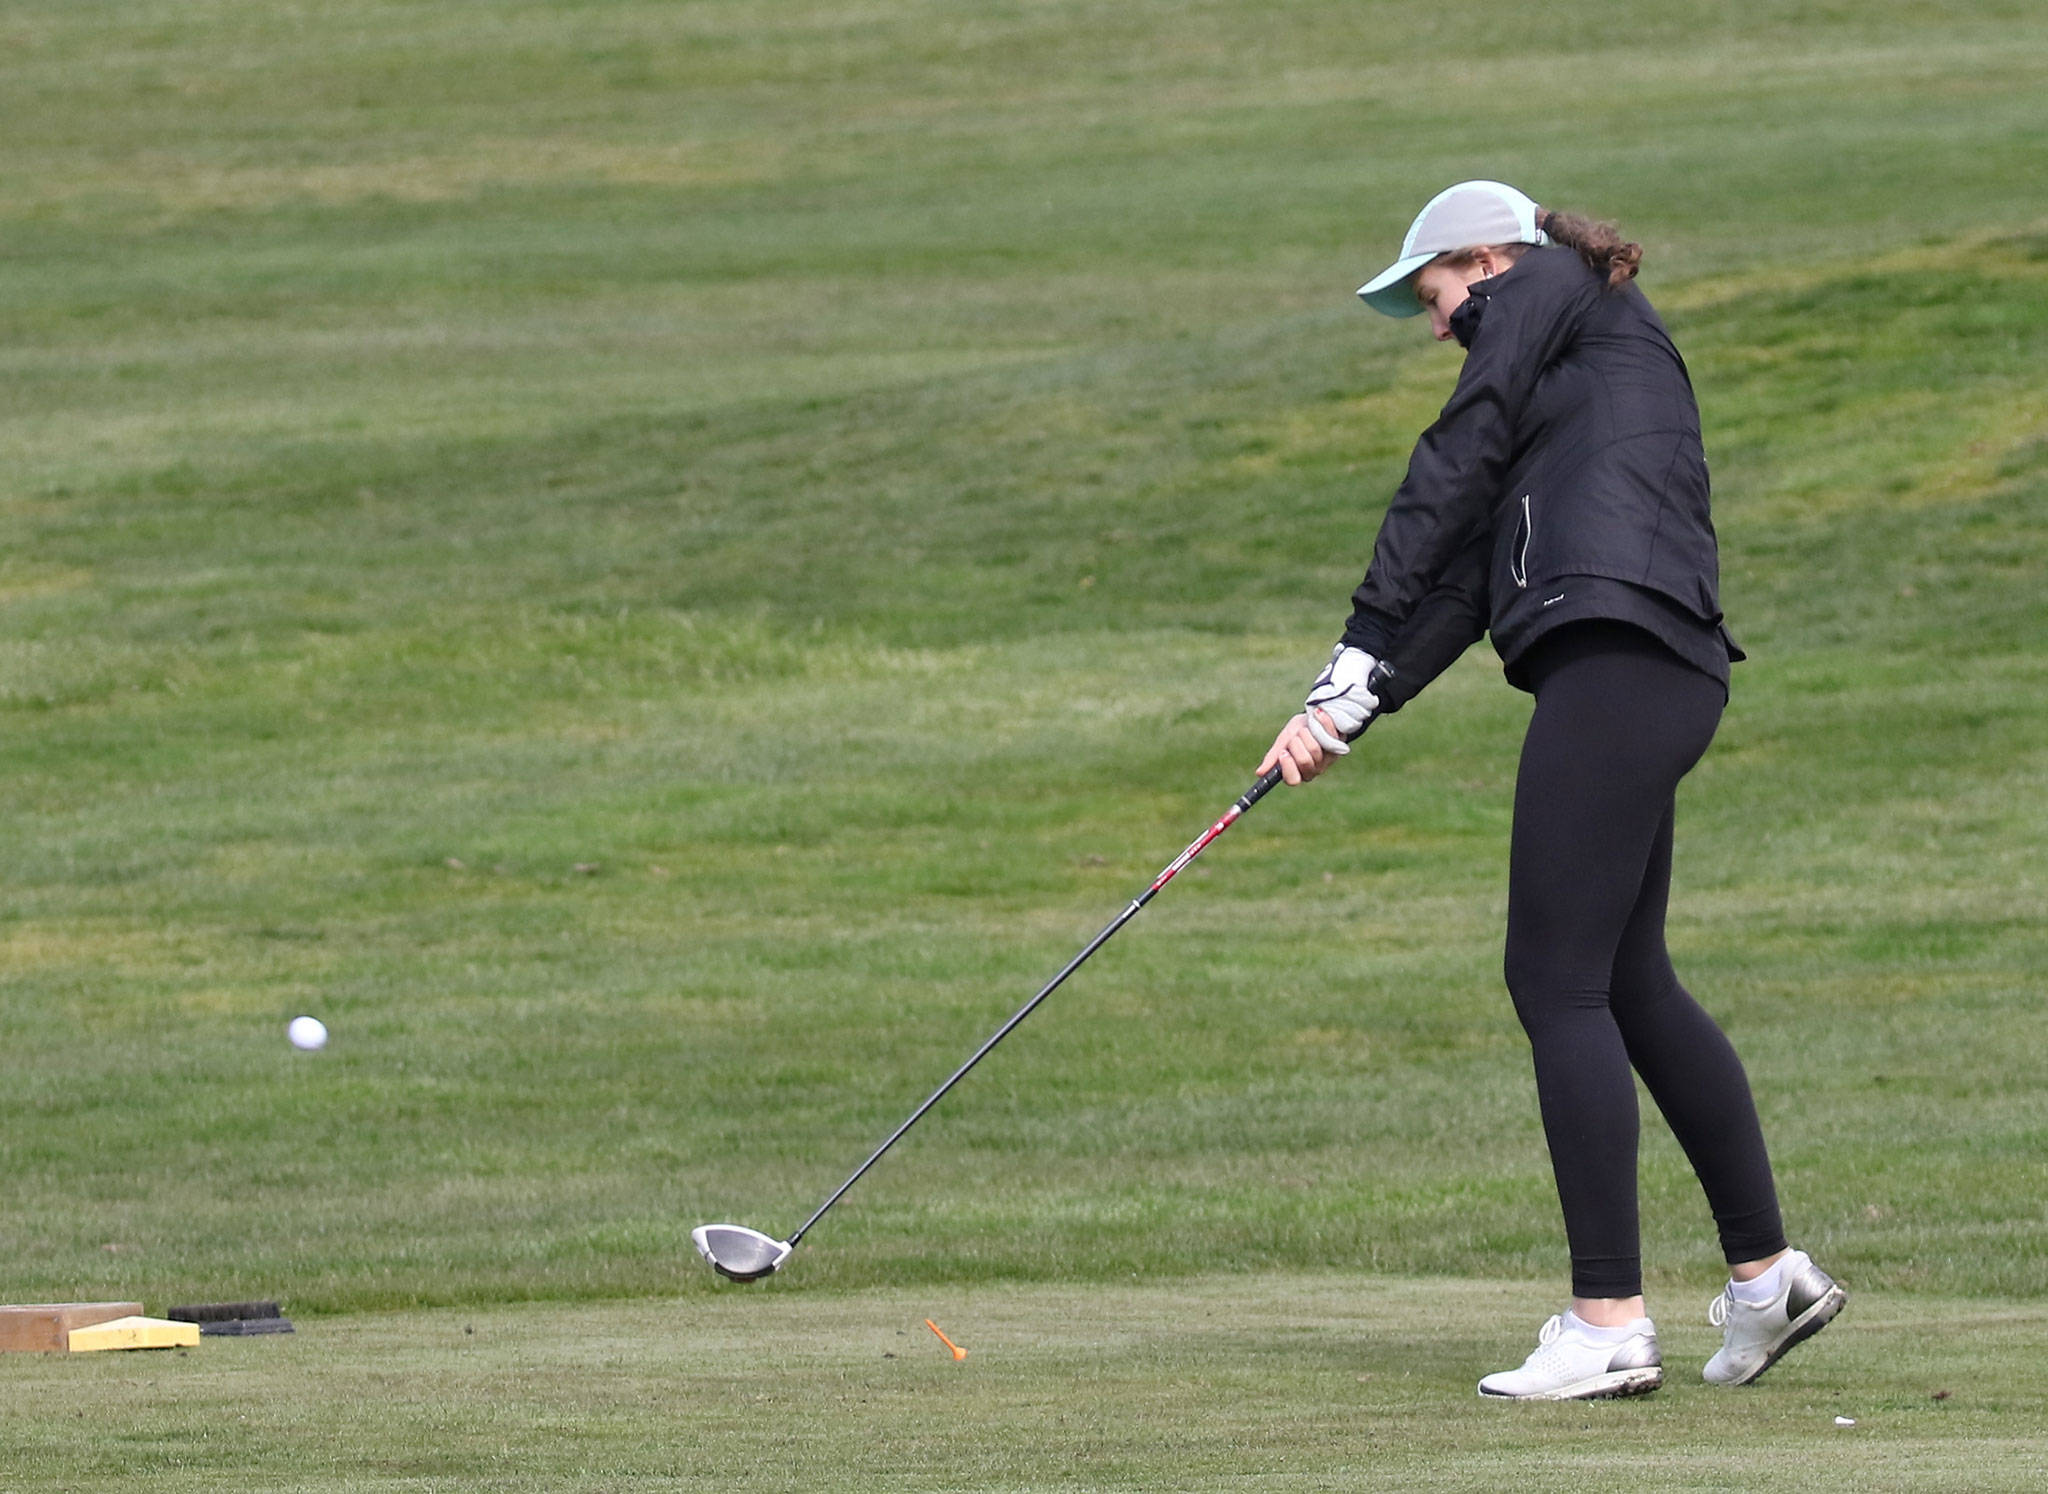 Emma Leggett tees off in the Shootout at the Whidbey Golf Club in Oak Harbor Tuesday. (Photo by John Fisken)